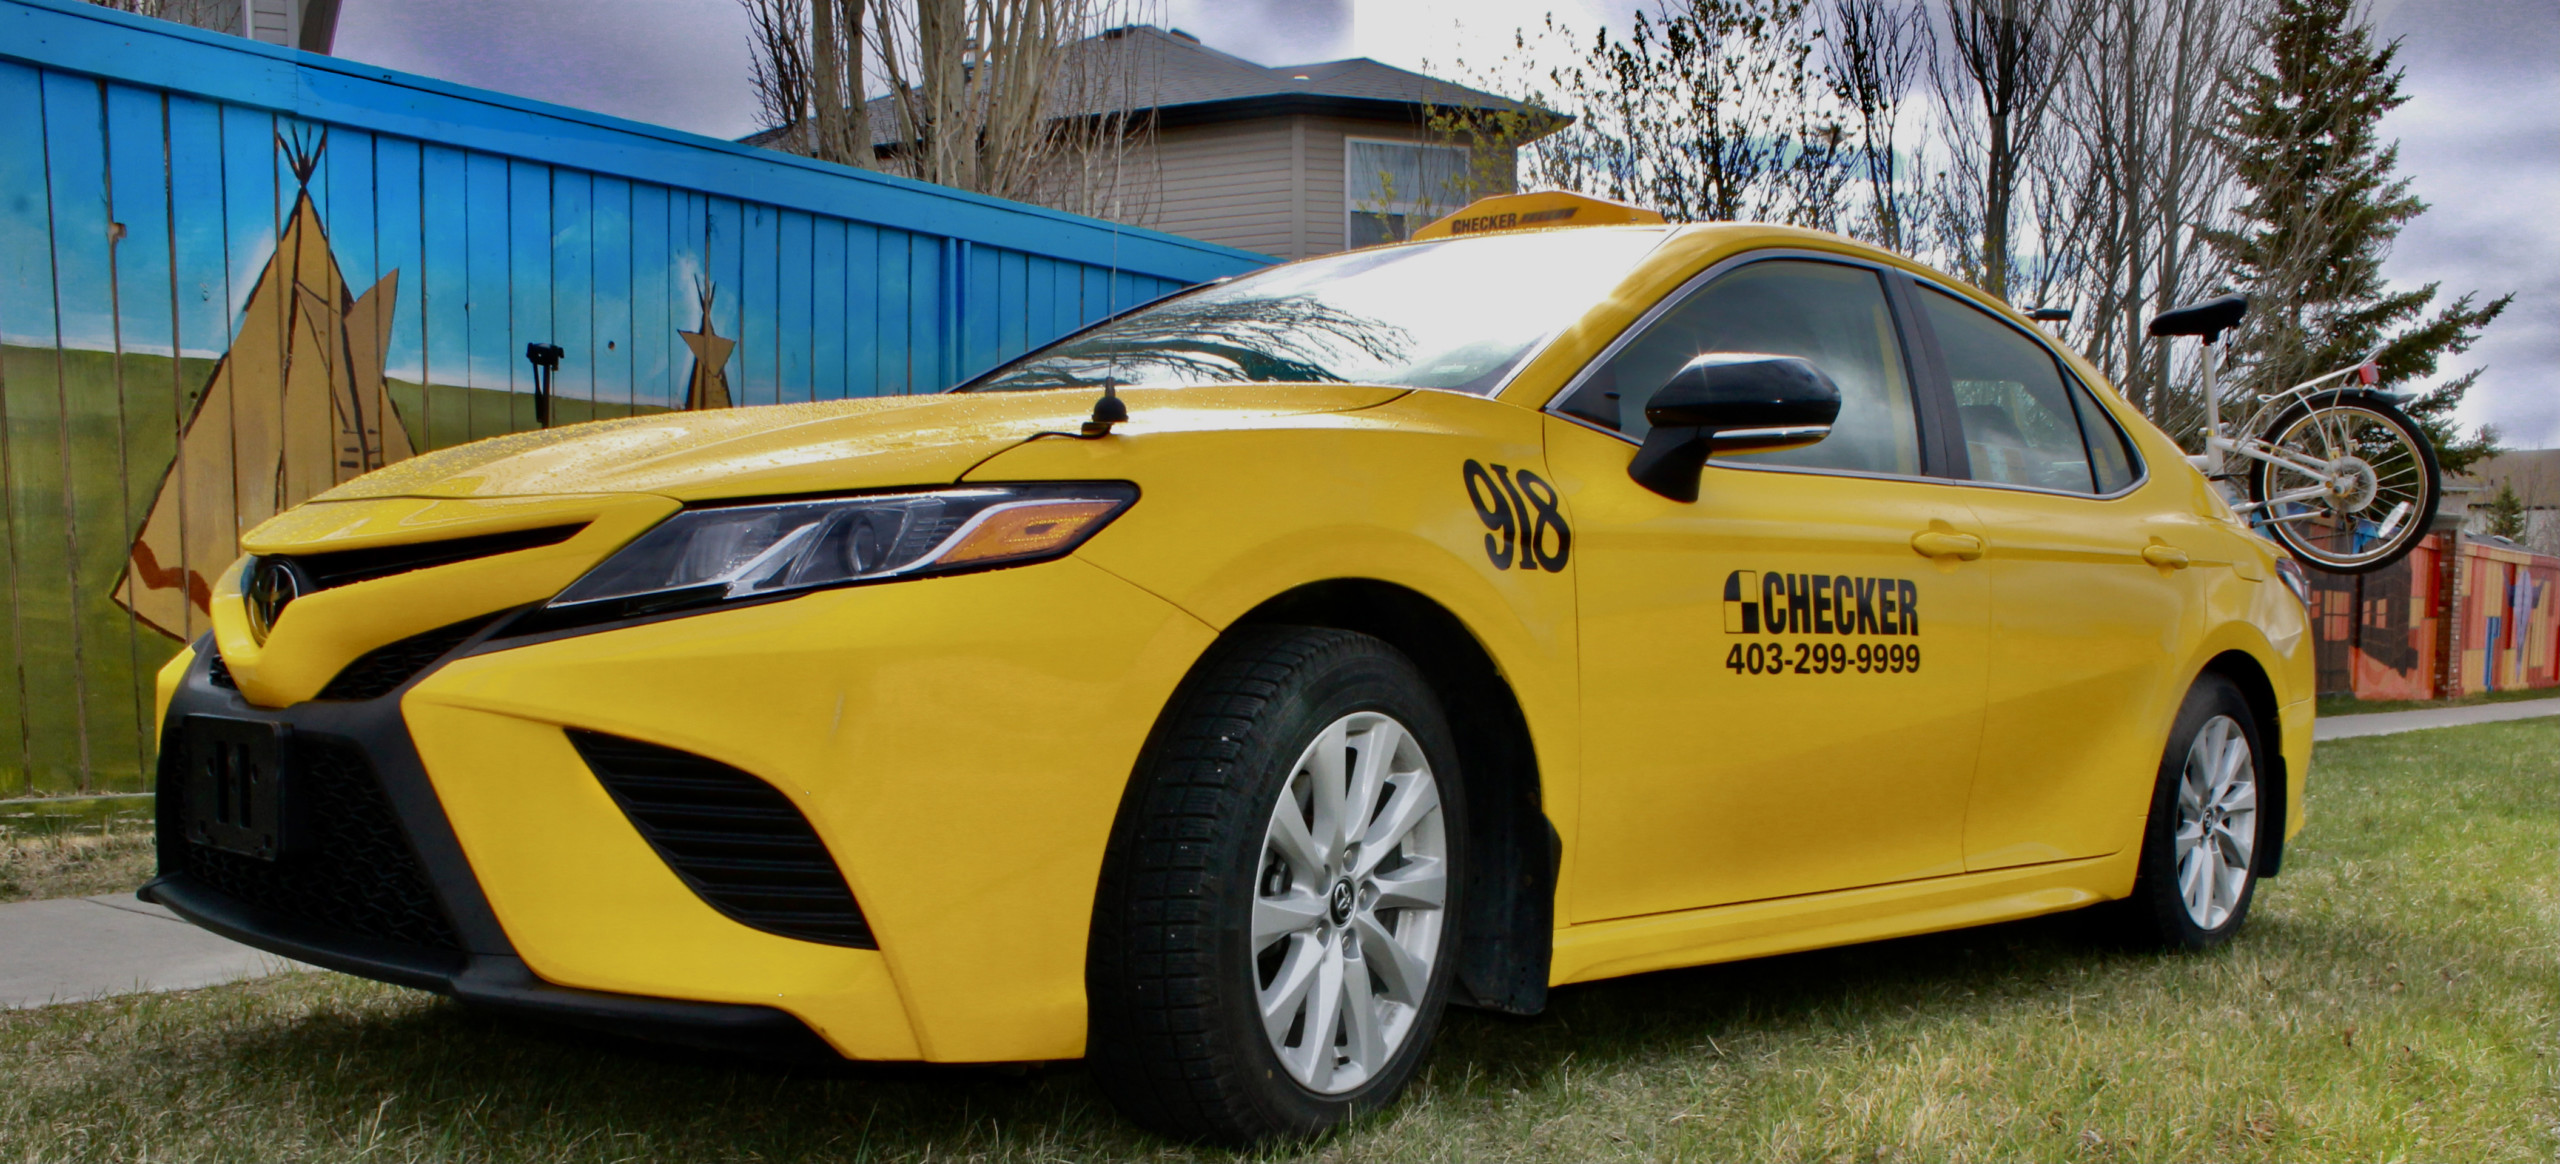 AA Carz - Private Hire Taxi Service Shipley